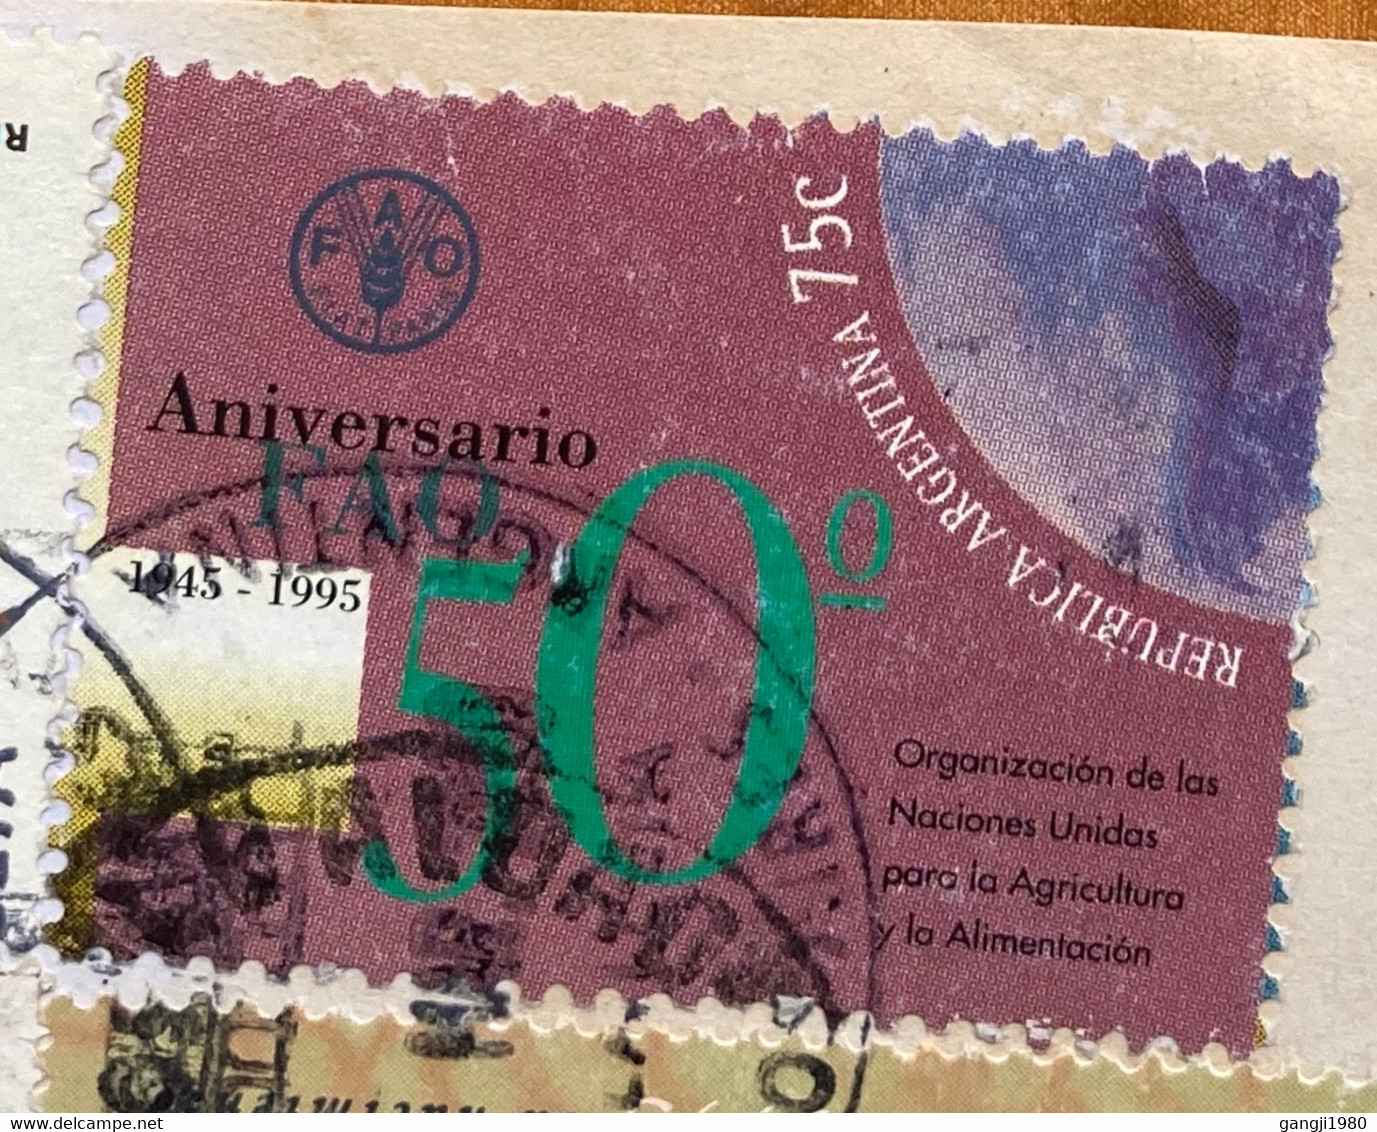 ARGENTINA 2000, JUAN PERON, OWL BIRD TAB, 3 STAMPS SPECIAL BUILDING CANCELLATION,AIRMAIL COVER TO INDIA, RECEIVED IN TOR - Covers & Documents